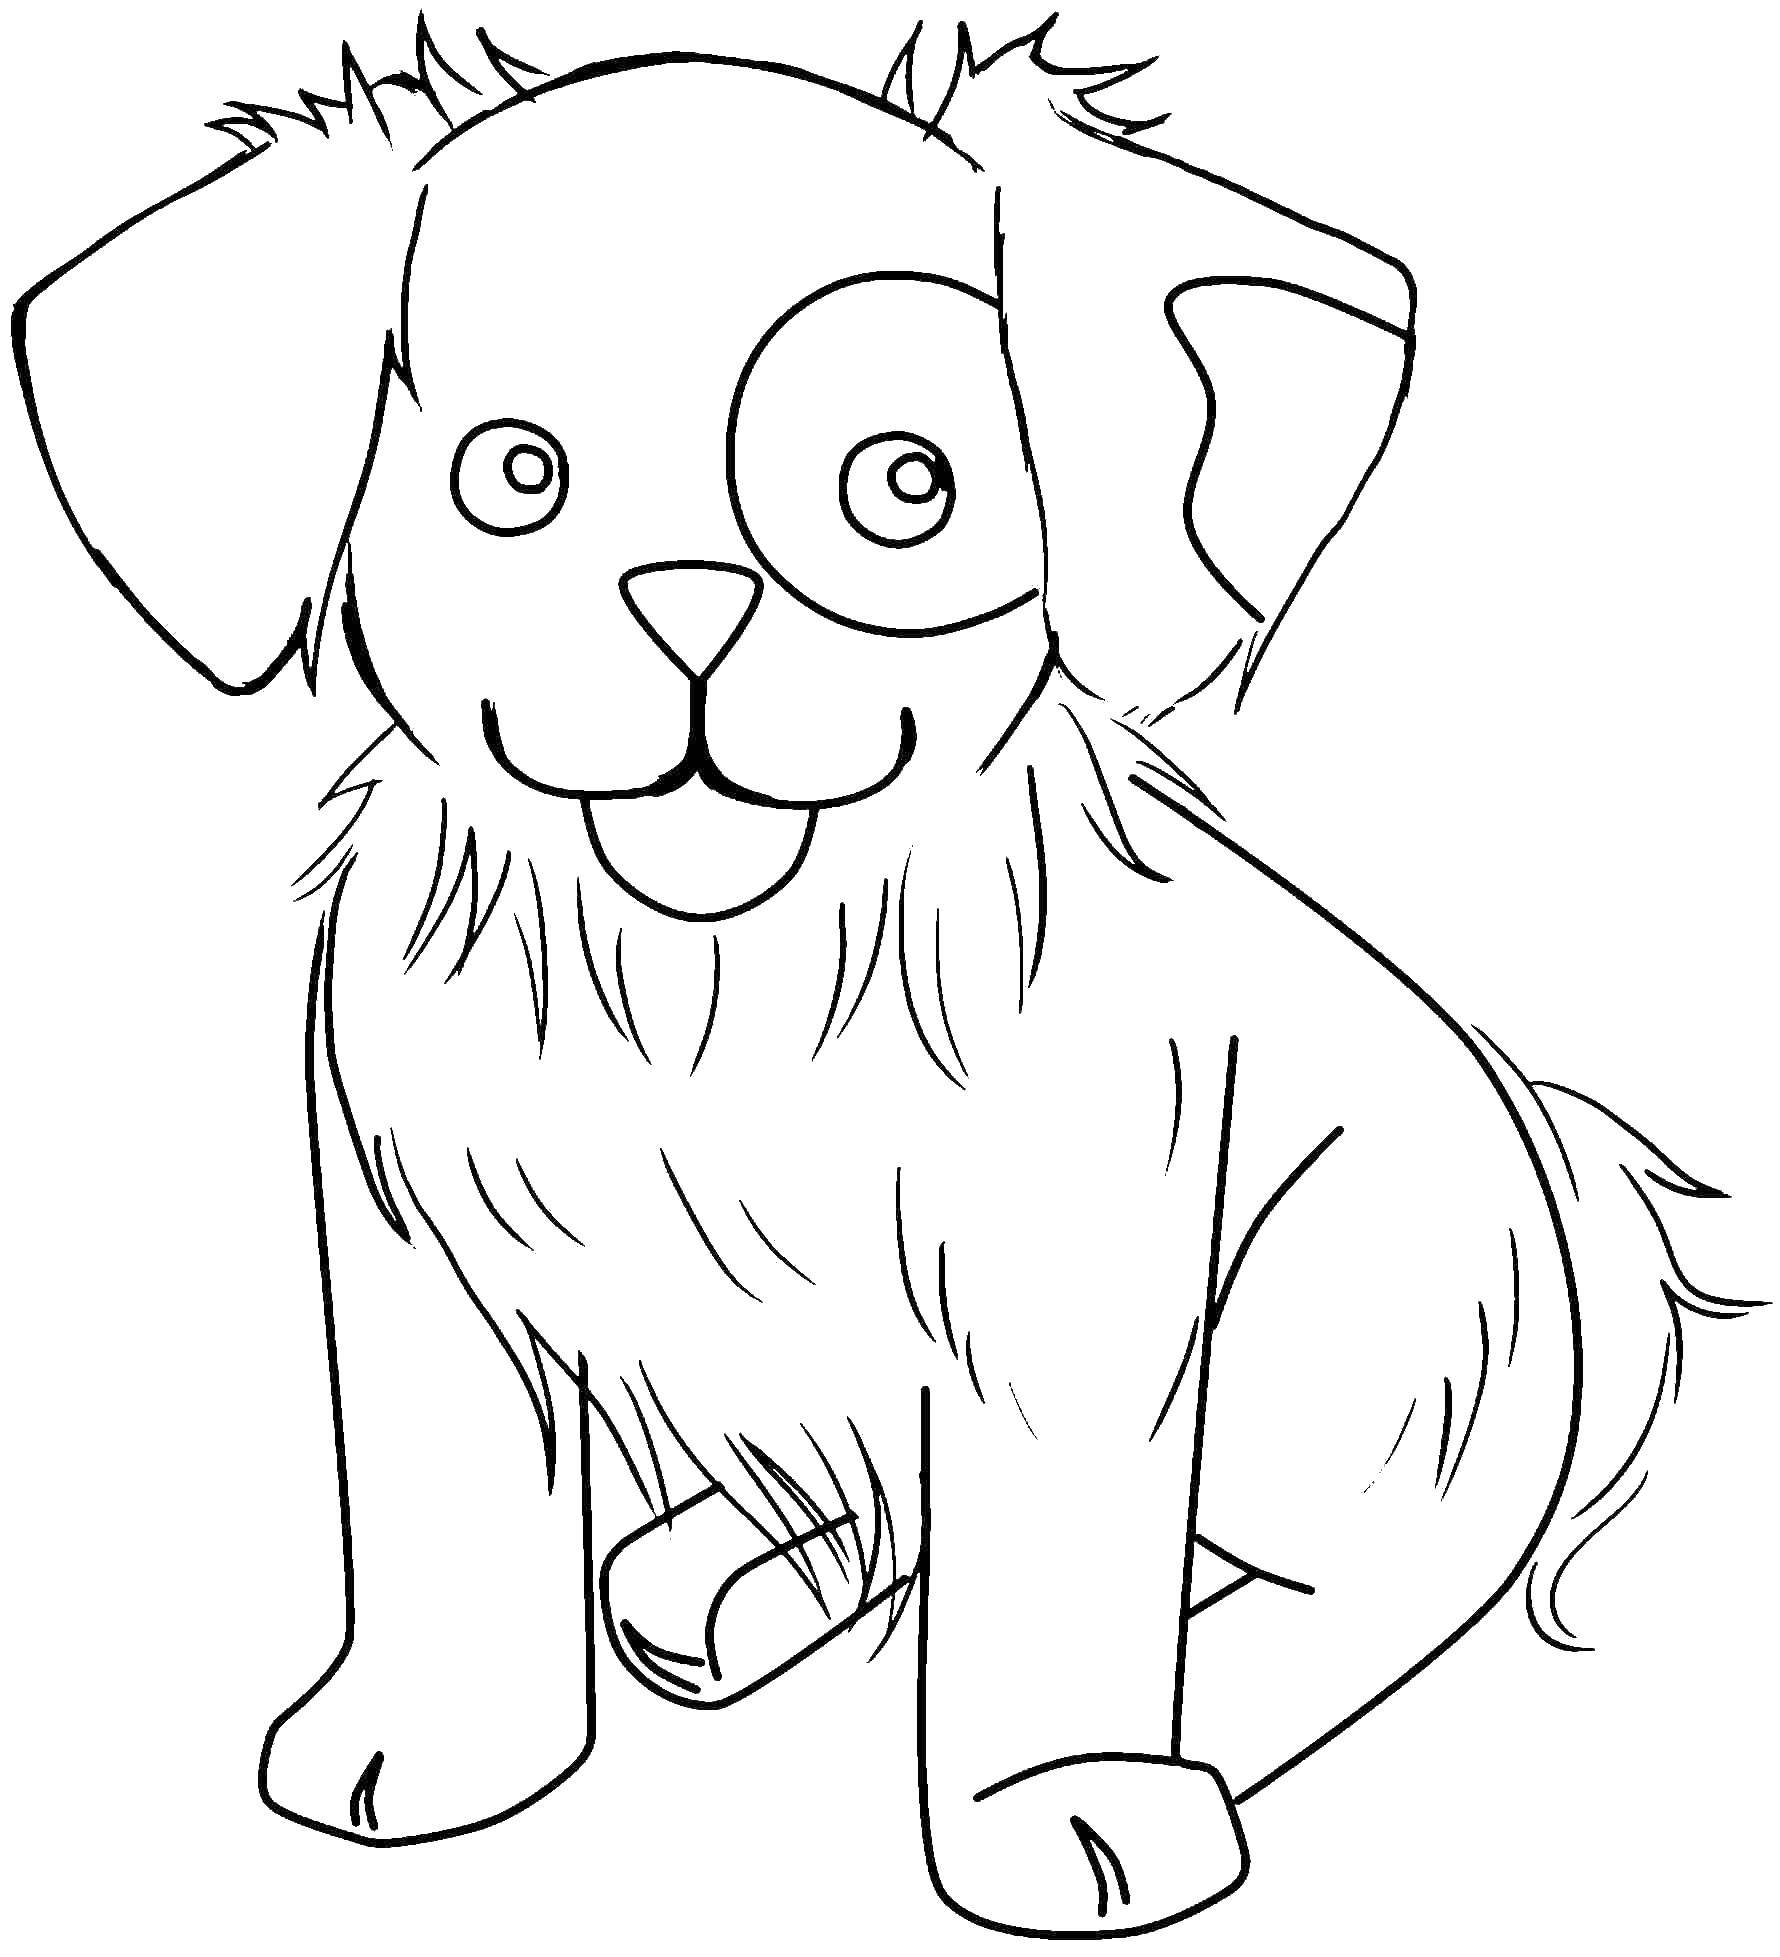 Coloring Puppy. Category the dog. Tags:  puppy .